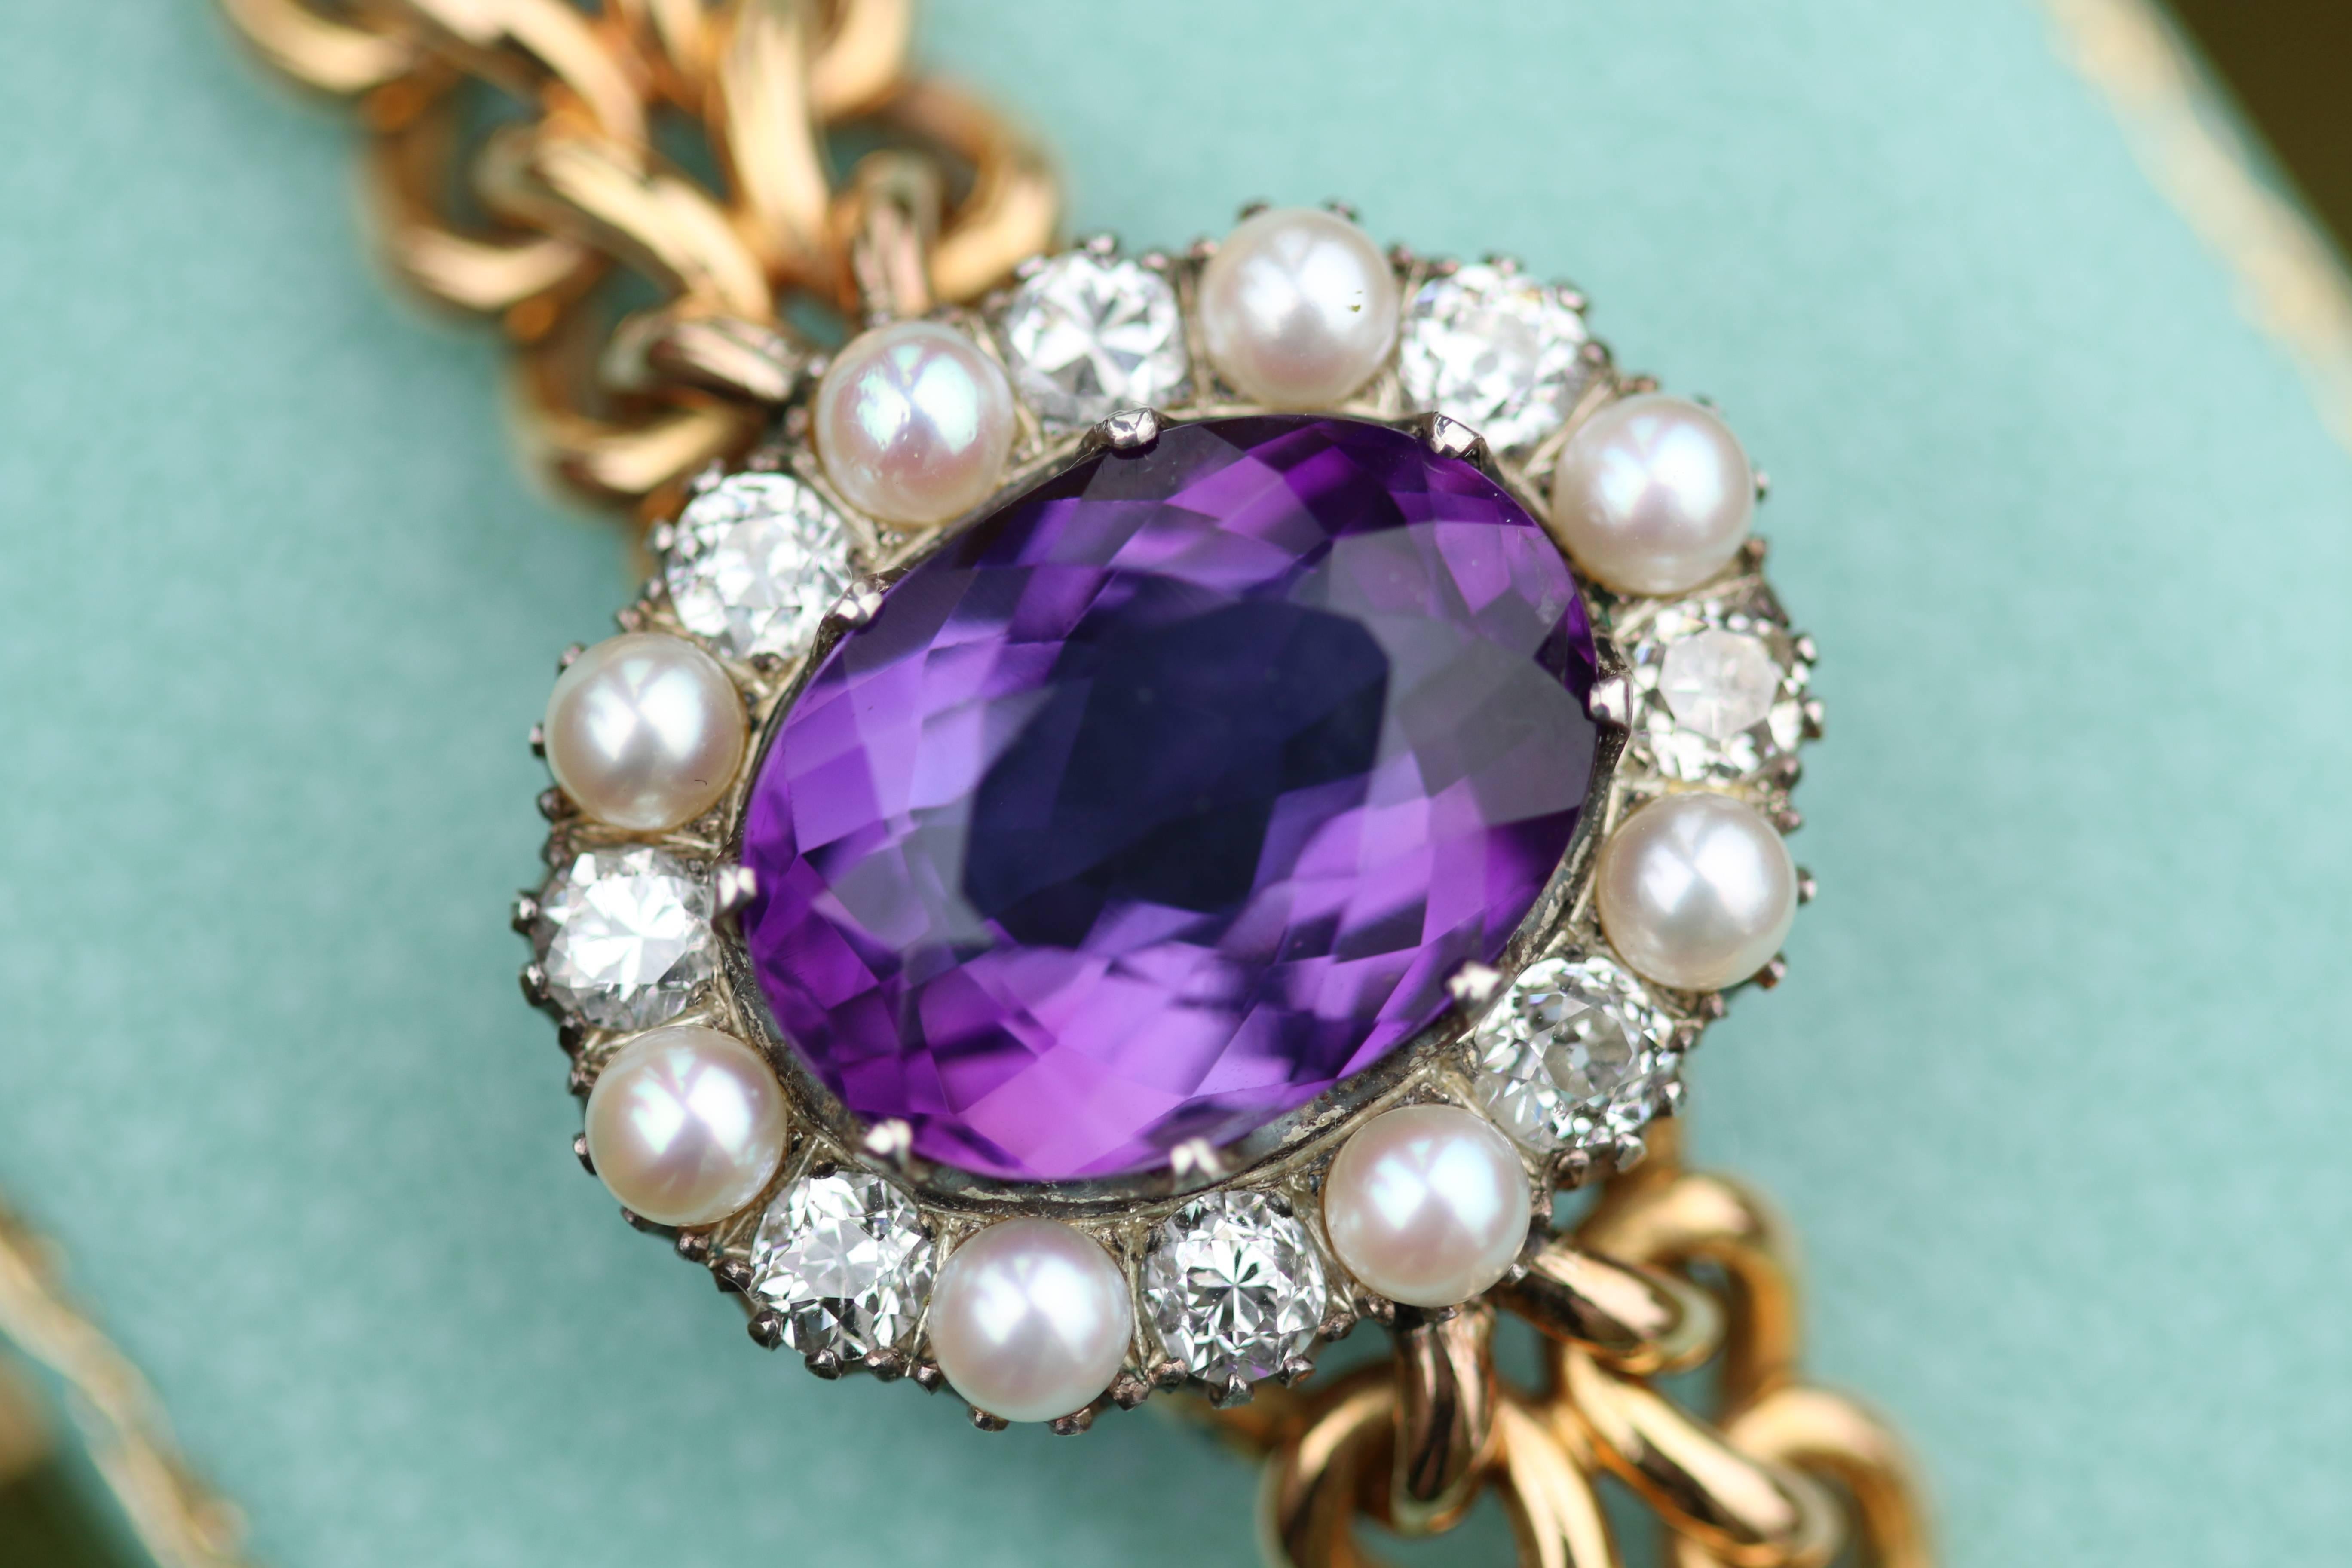 Enriching your wrist and entire collection is this breathtakingly beautiful bracelet. Centring this bracelet is an oval cut amethyst with mind-blowing colour and depth. The way the light passes through, reflects and refracts in the stone is